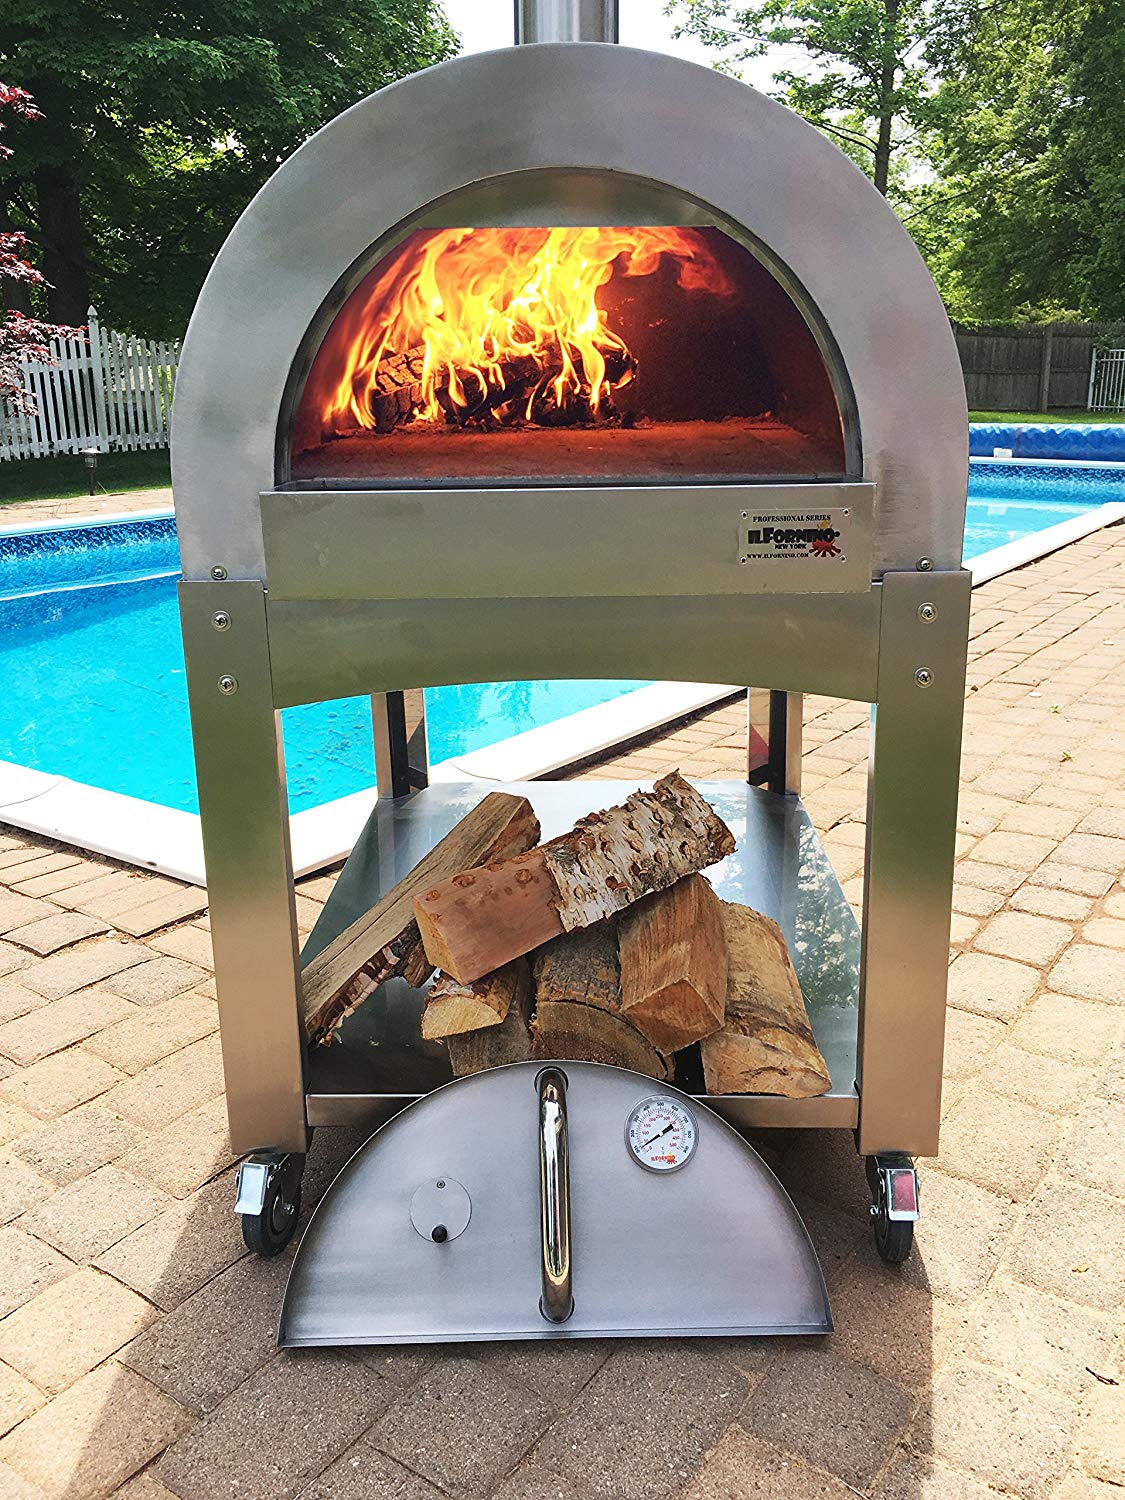 10 Best Propane Pizza Oven To Buy in 2019 Reviews & Guides